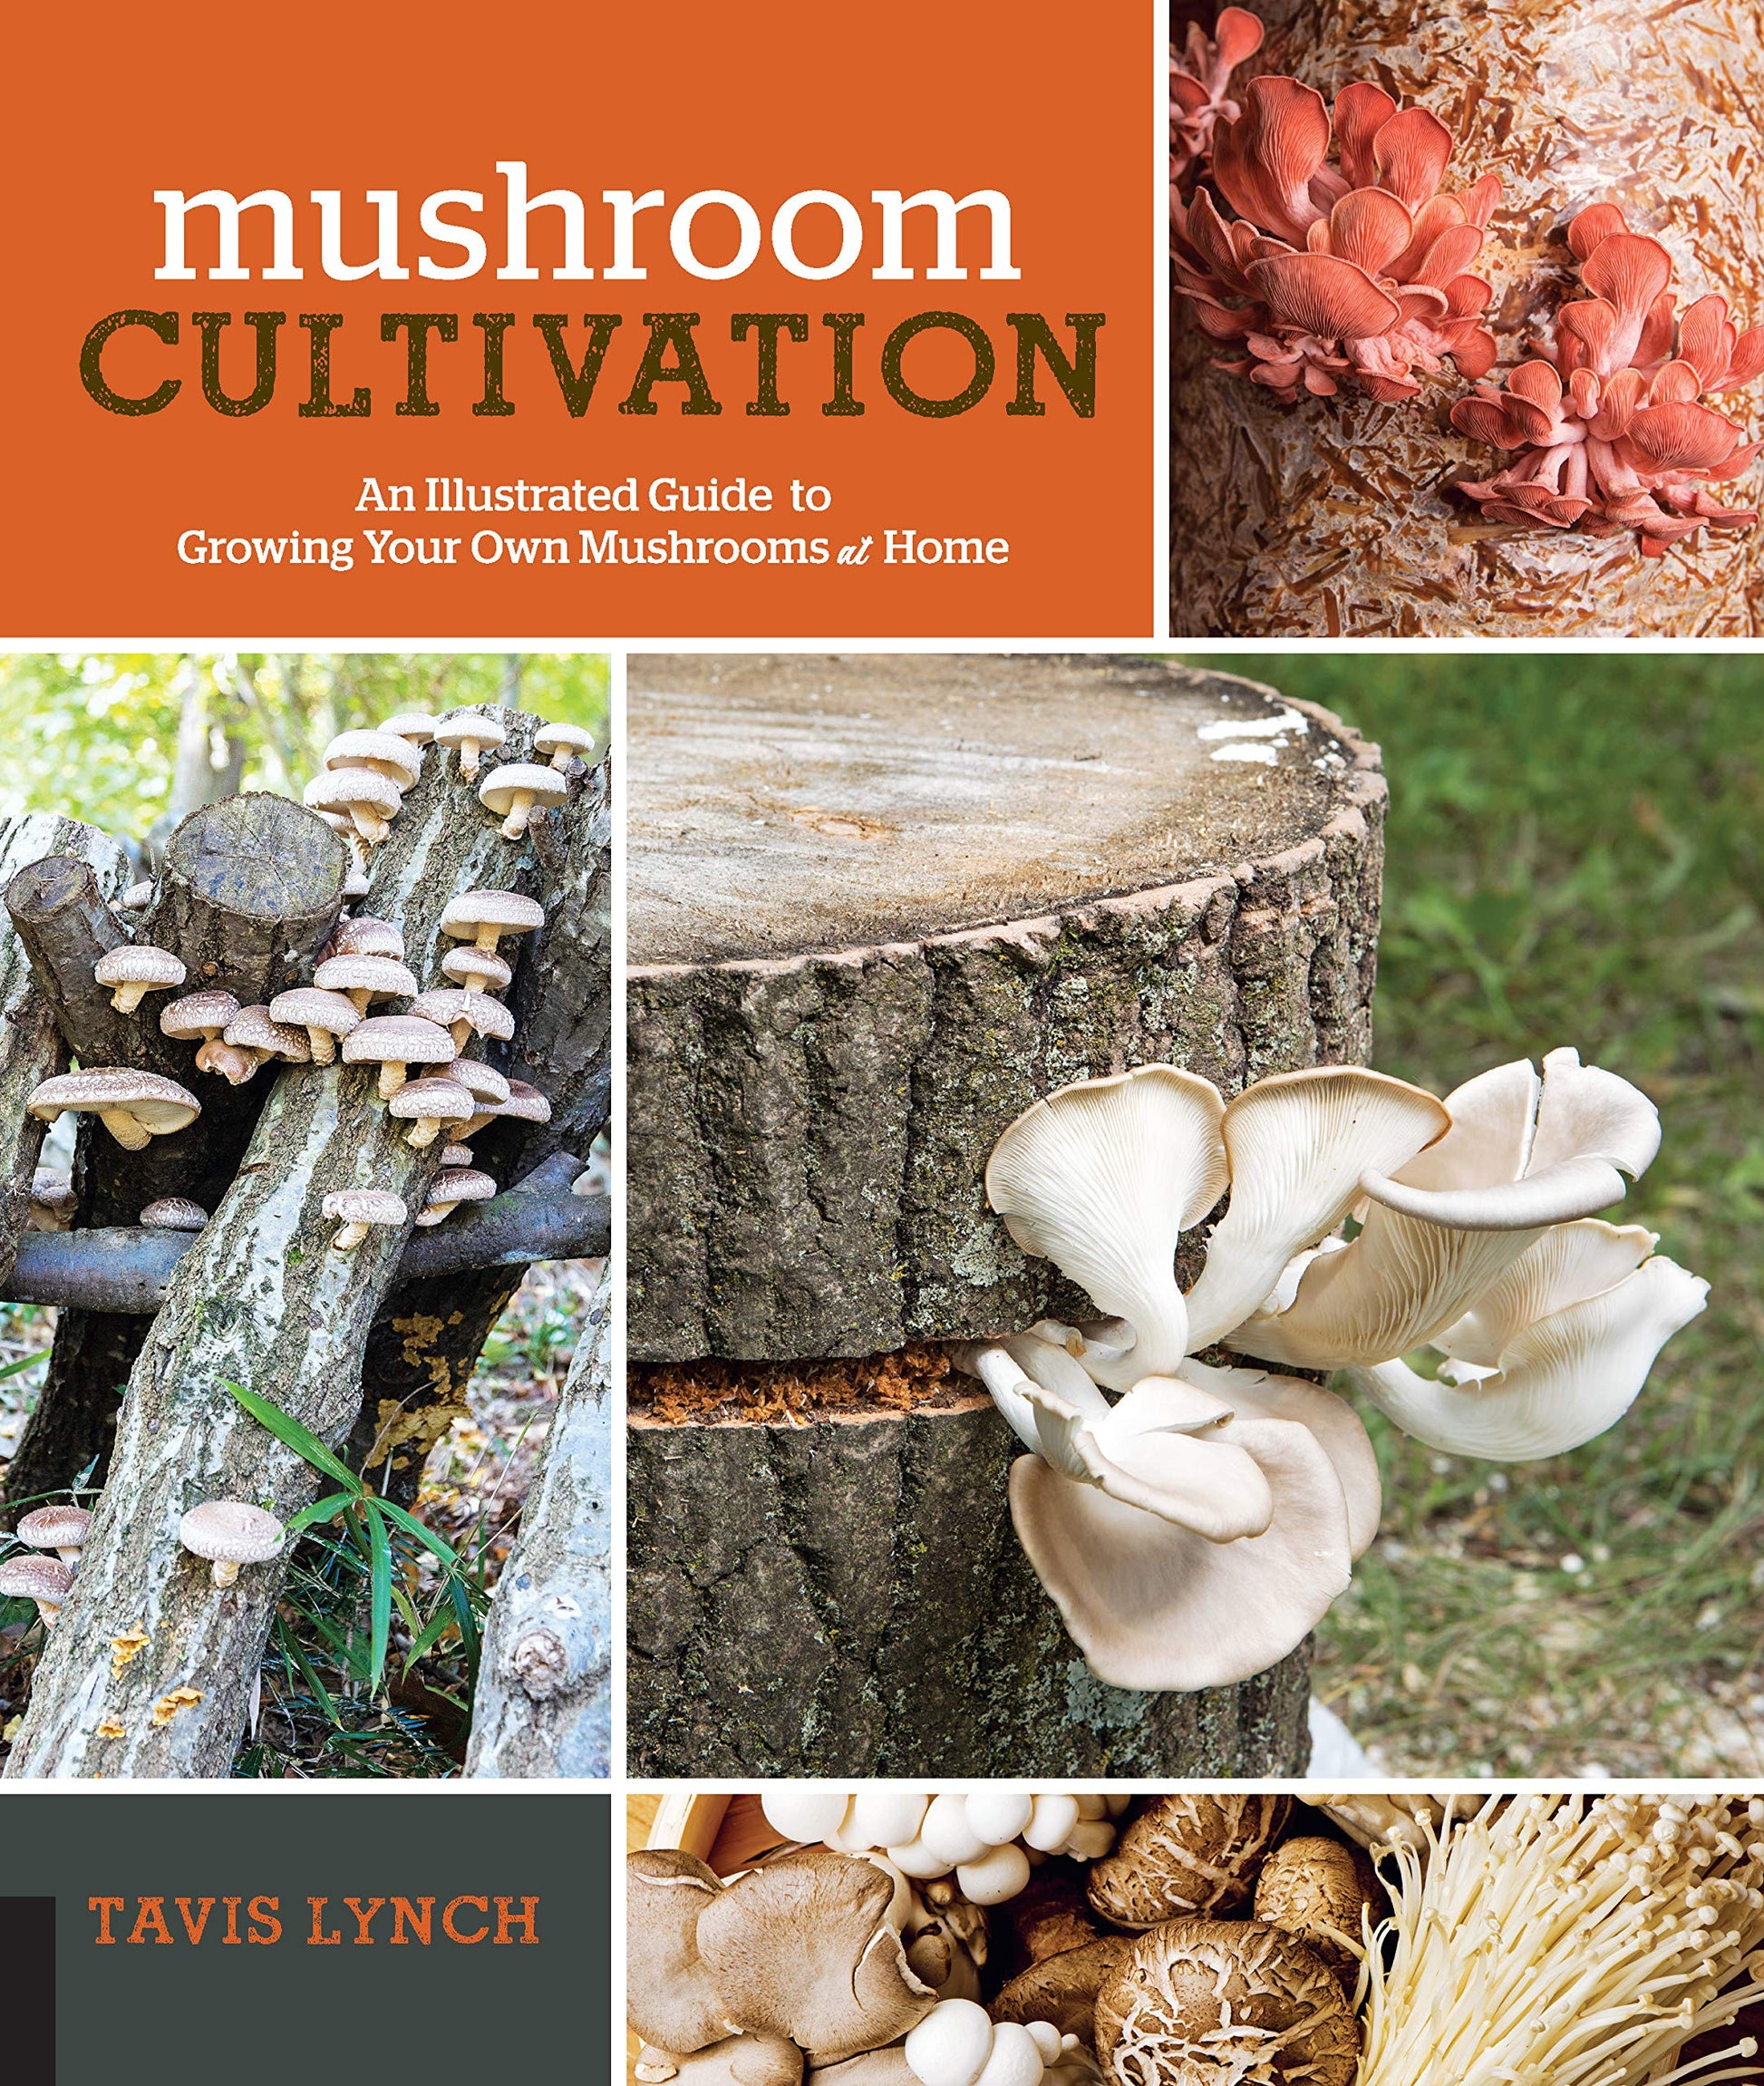 Mushroom Cultivation: An Illustrated Guide to Growing Your Own Mushrooms at Home by Tavis Lynch